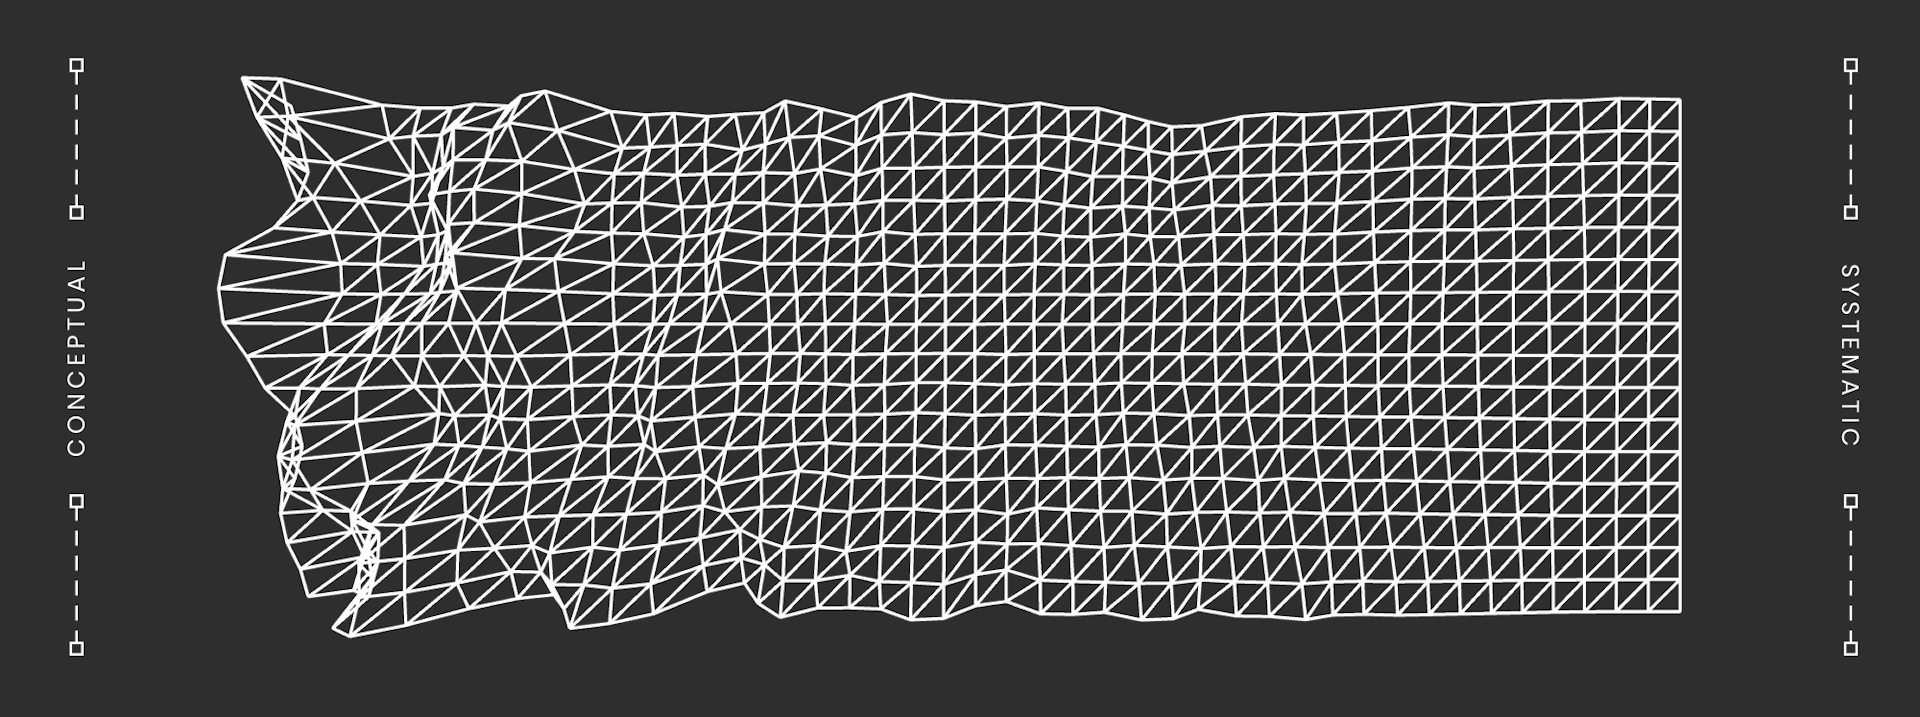 Illustration of a a white grid on a black background. On the left hand side it's crinkled into 3D folds and shapes and on the right hand side it's flat and 2D